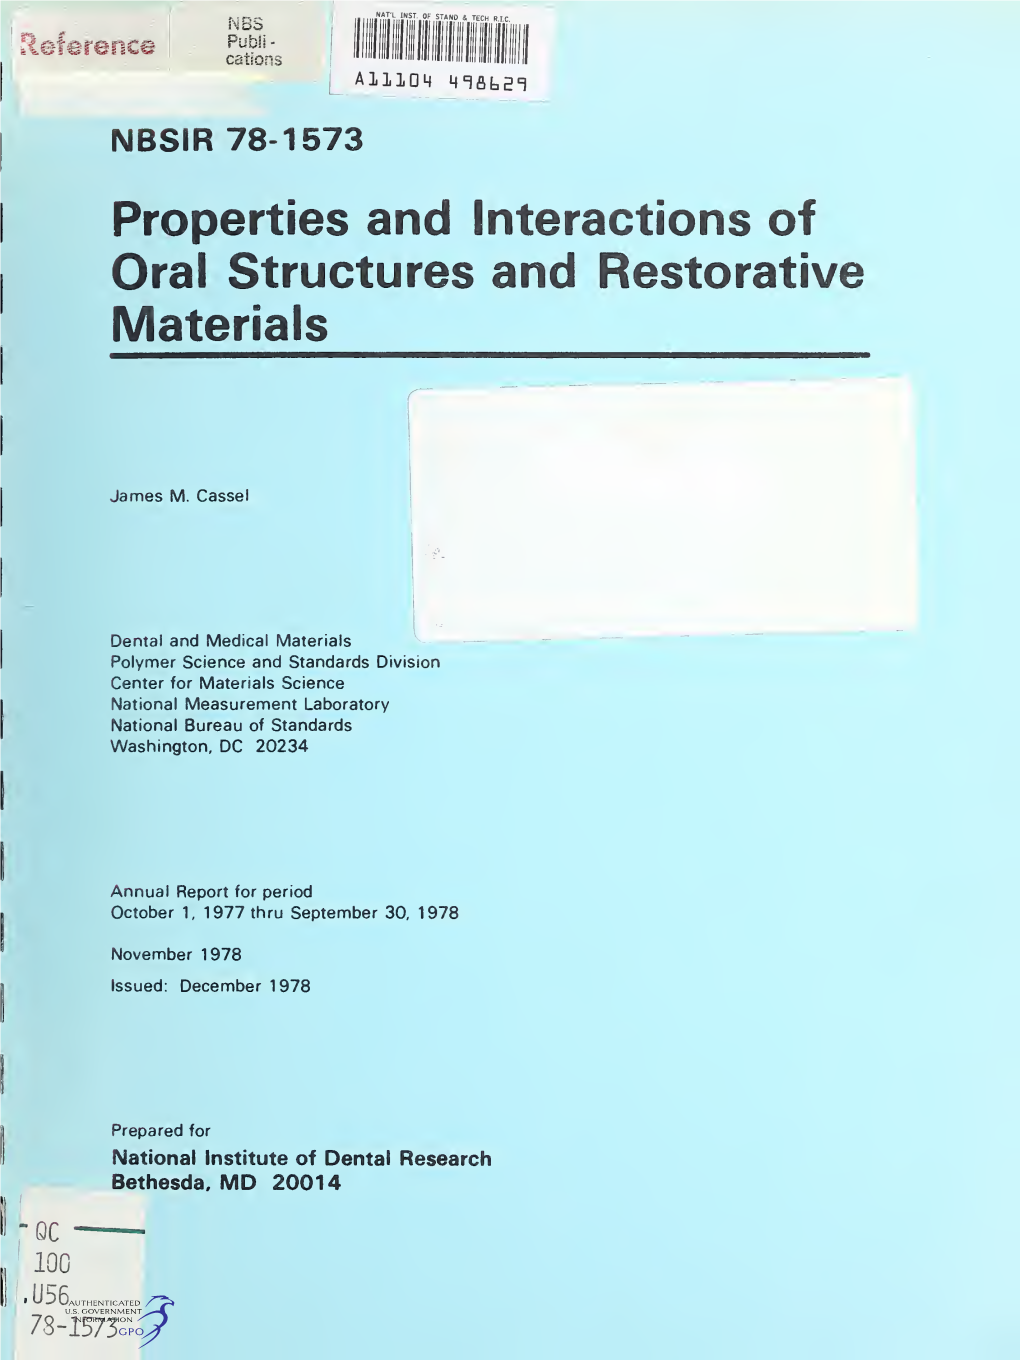 Properties and Interactions of Oral Structures and Restorative Materials